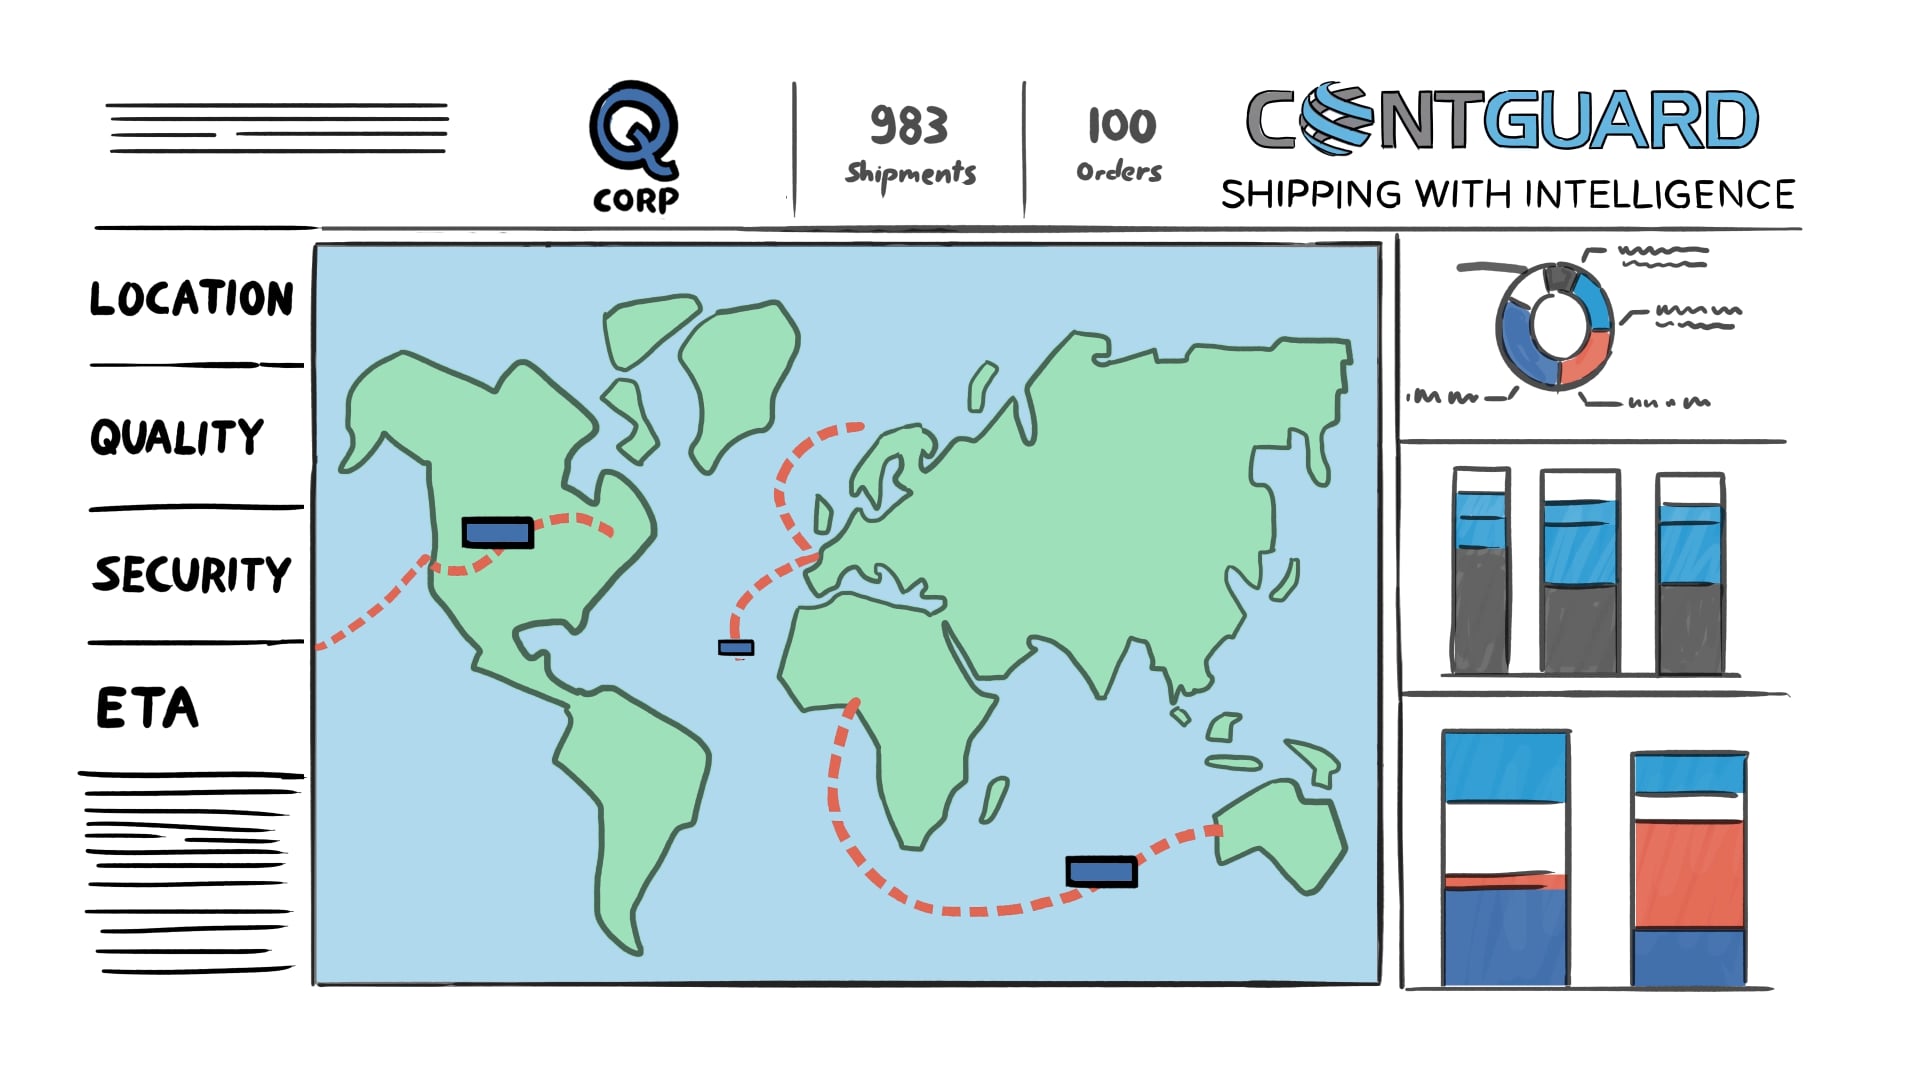 ContGuard - Shipping with intelligence